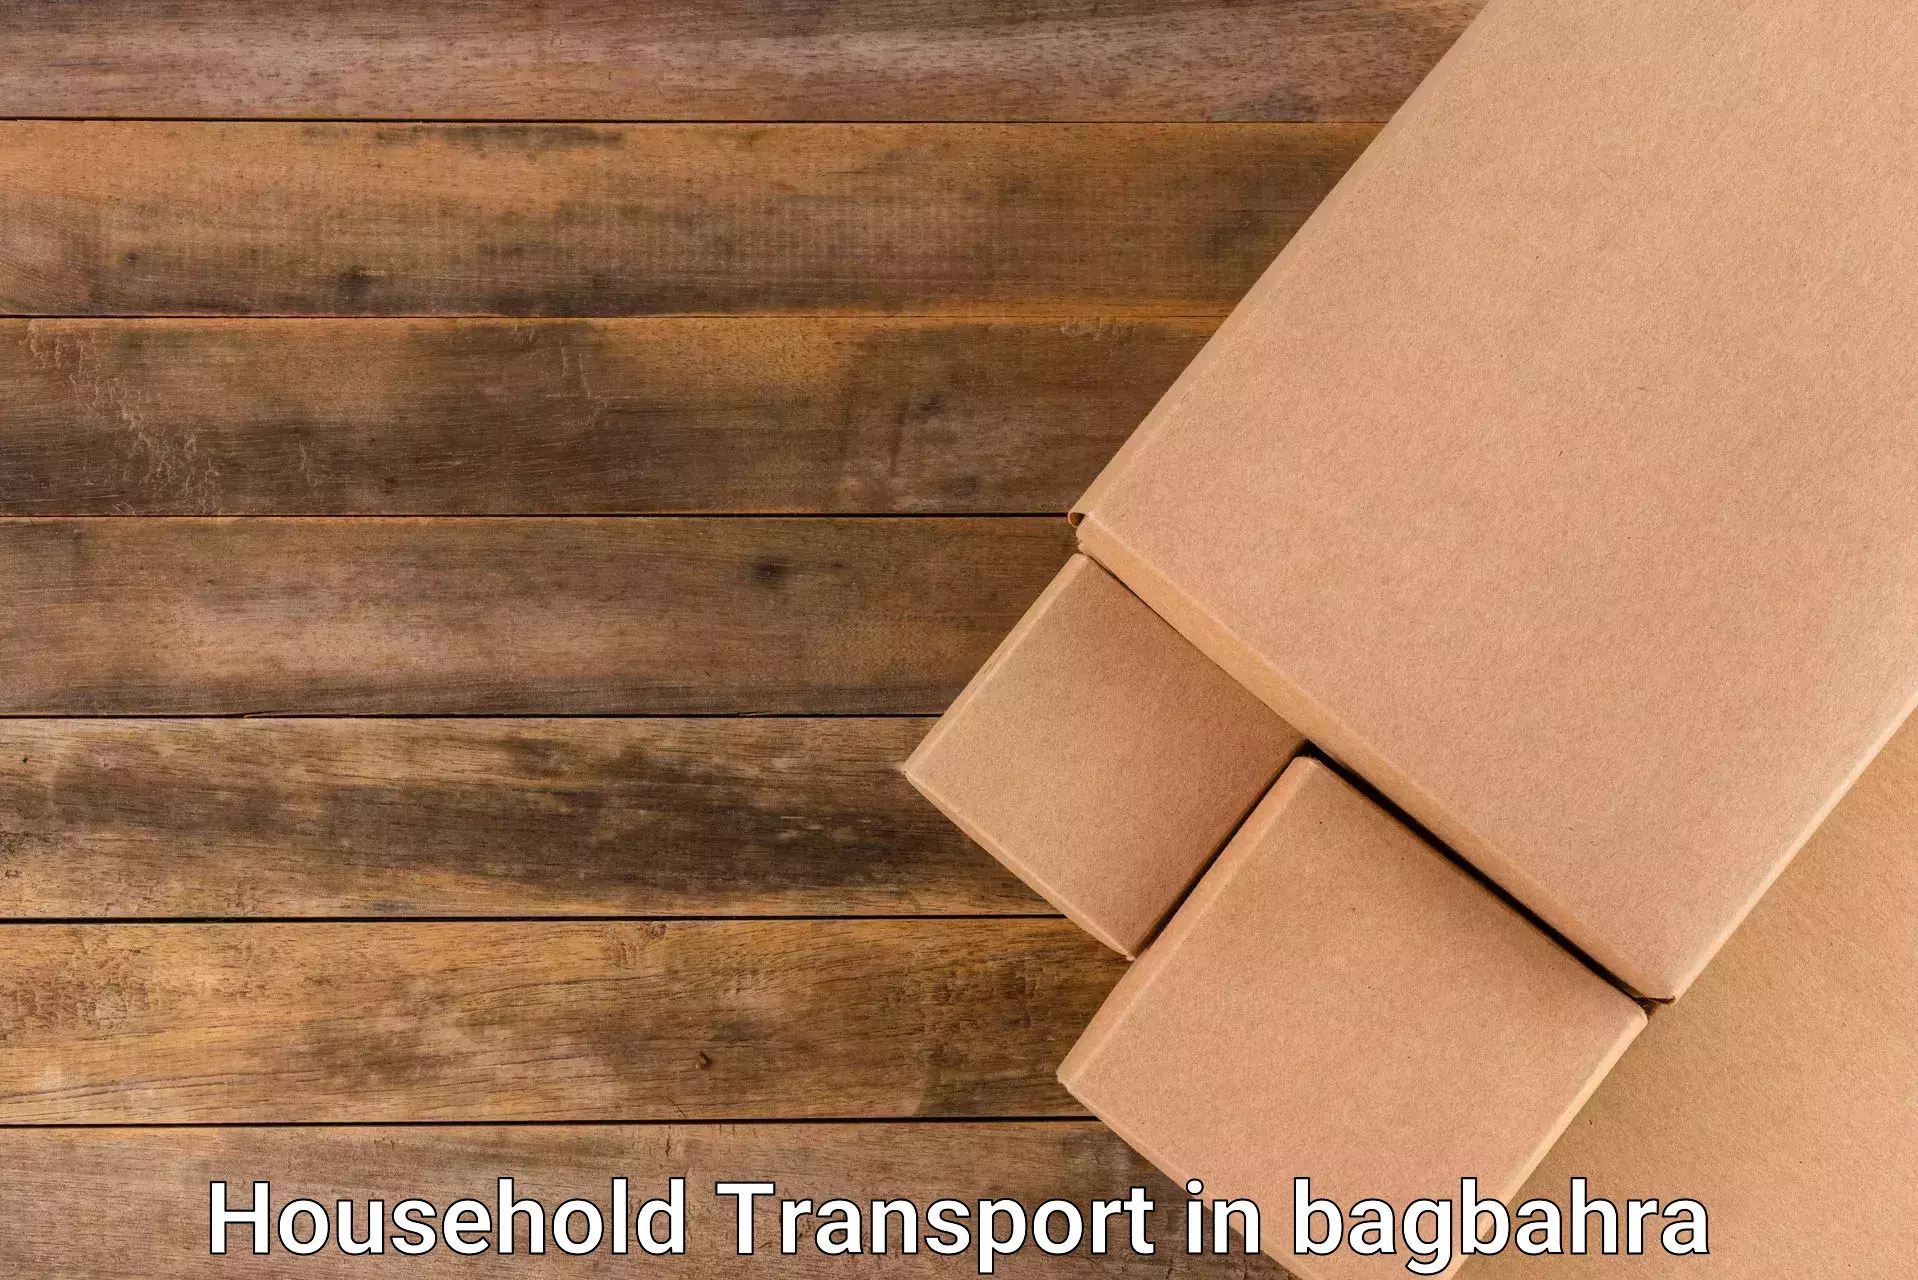 Hassle-free relocation in bagbahra